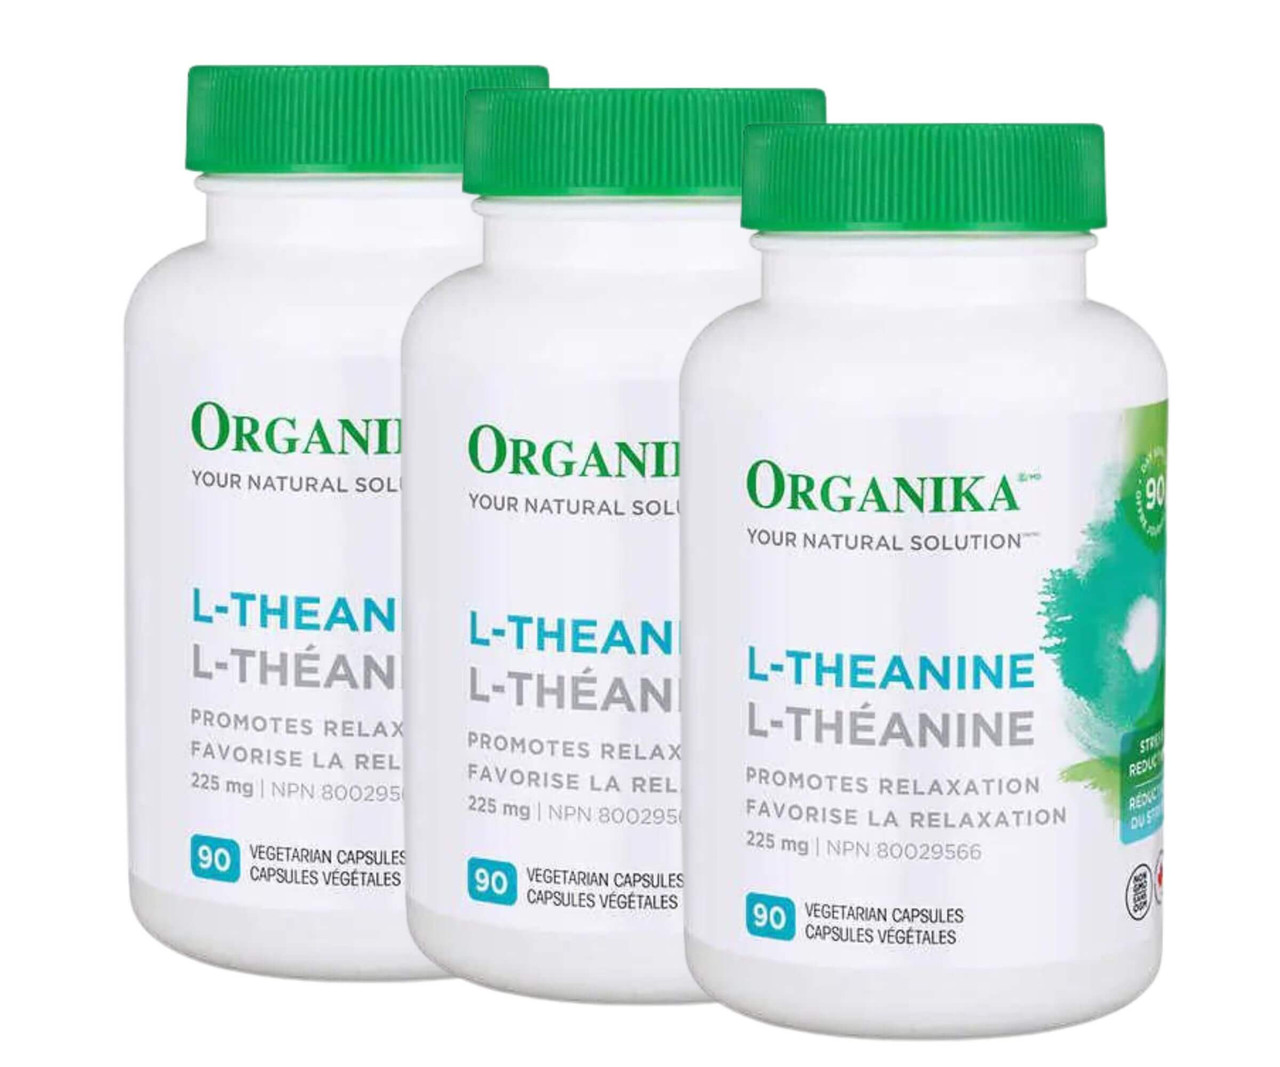 Organika L-Theanine 225 mg Vegetarian Capsules - 90-count, 3-Pack | Relaxation and Focus Support-Chicken Pieces